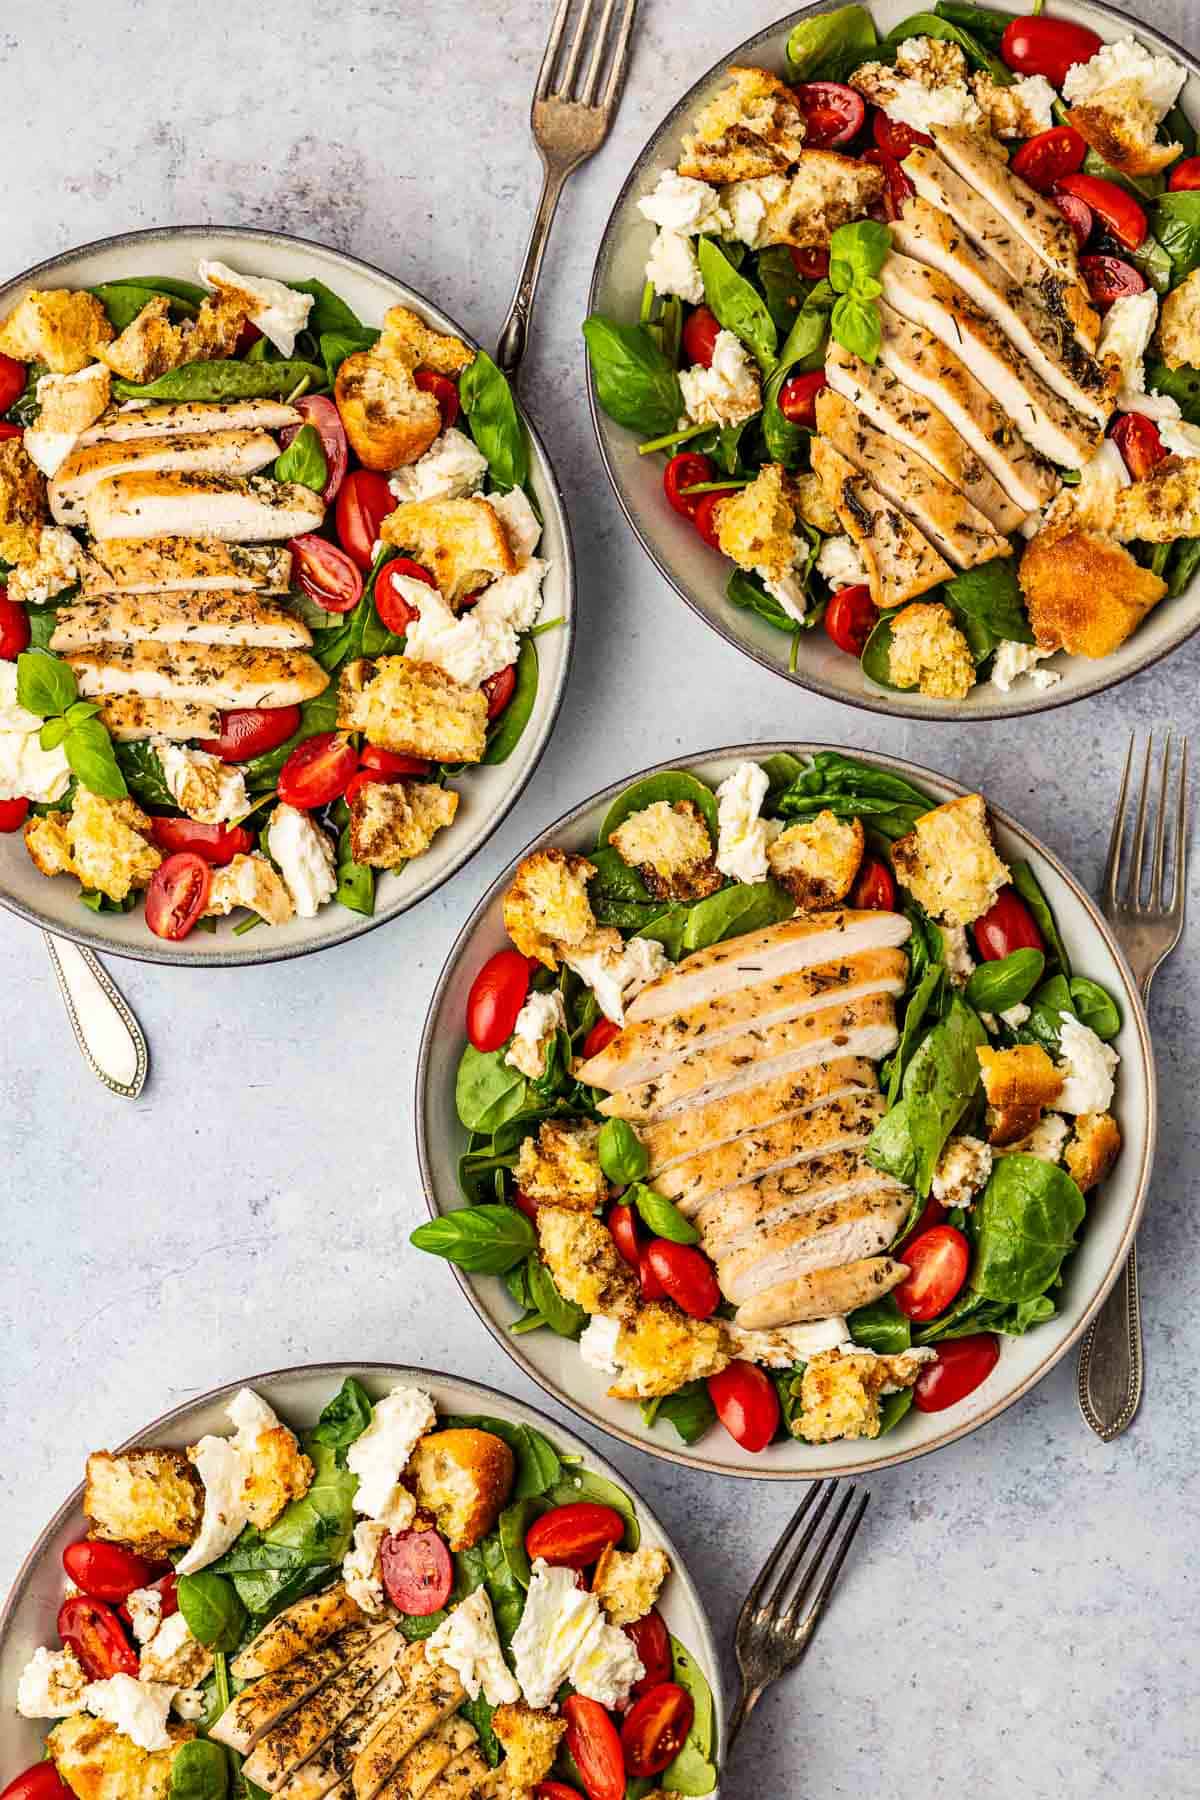 4 chicken caprese salads topped with basil, cherry tomatoes, mozzarella cheese and croutons in bowls with forks next to them.